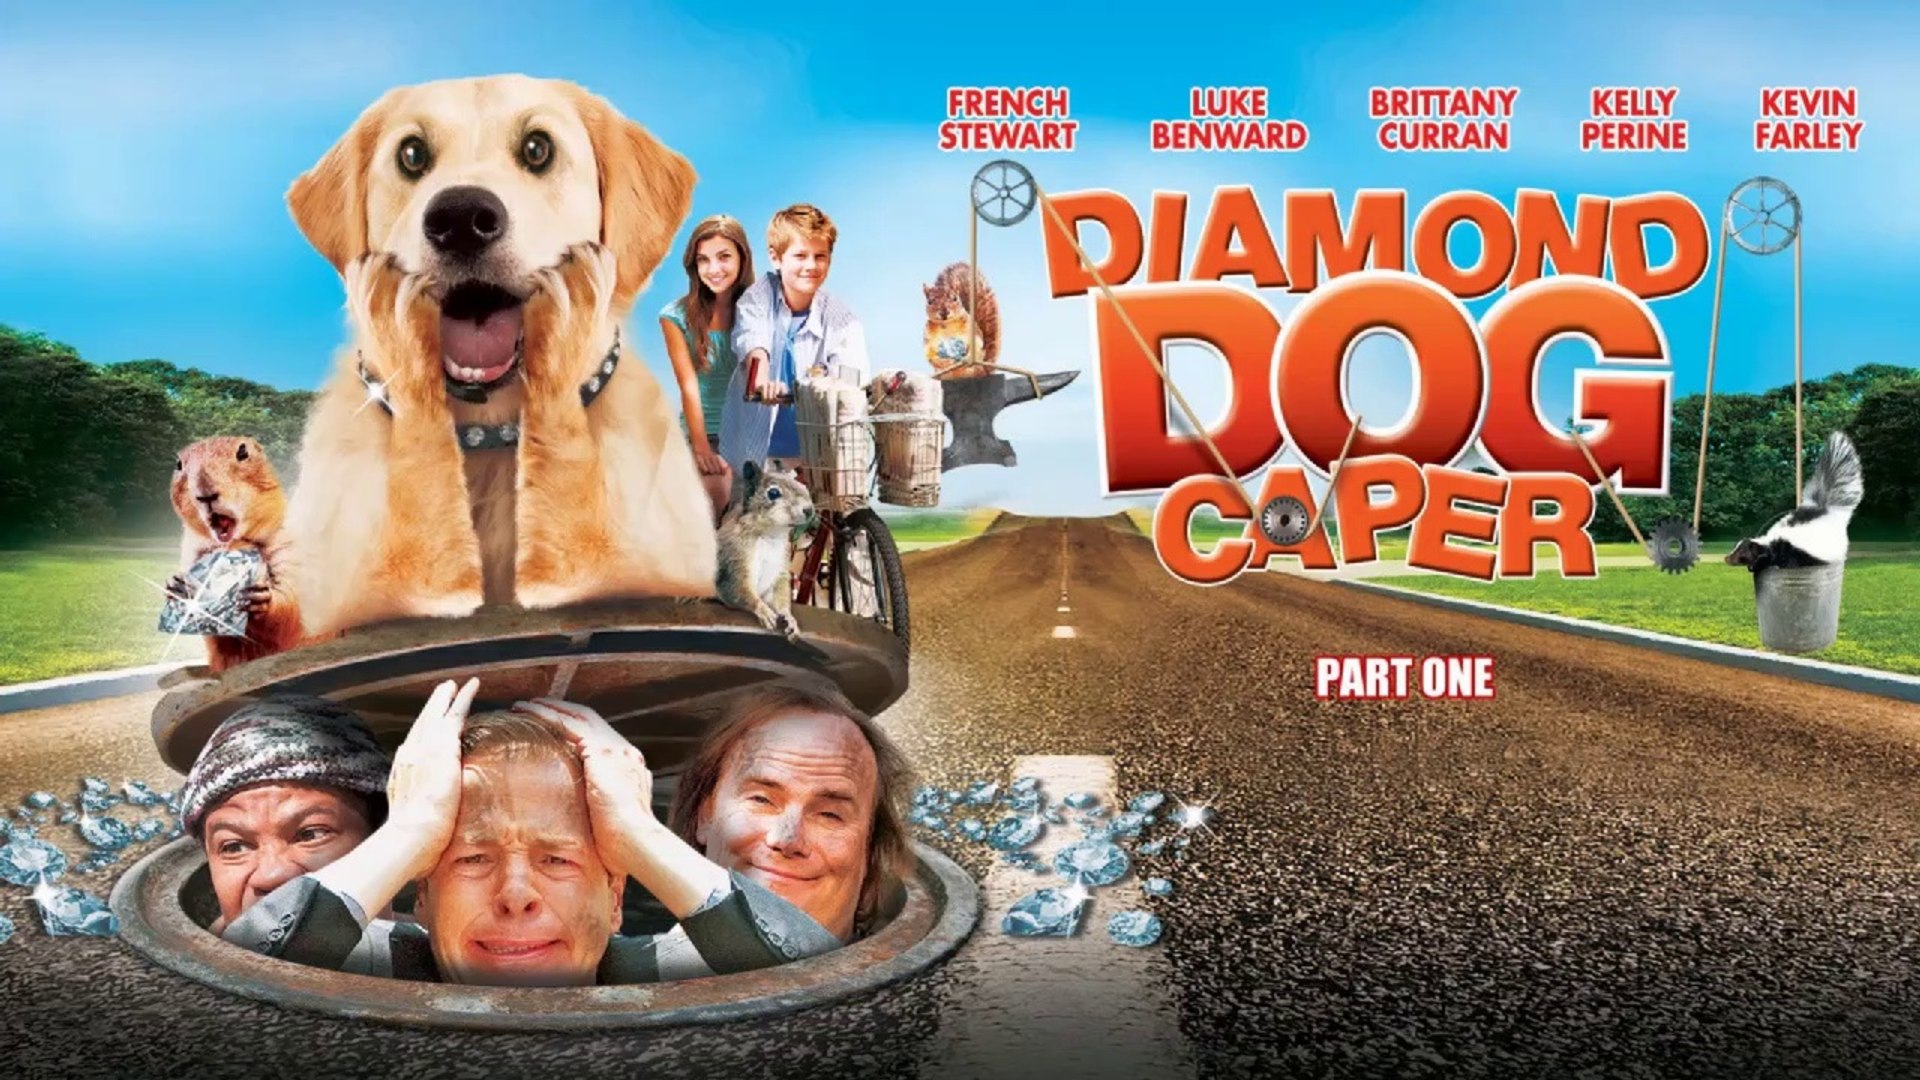 Diamond Dog Caper (2008) Part One (ENG) HD - Video Dailymotion